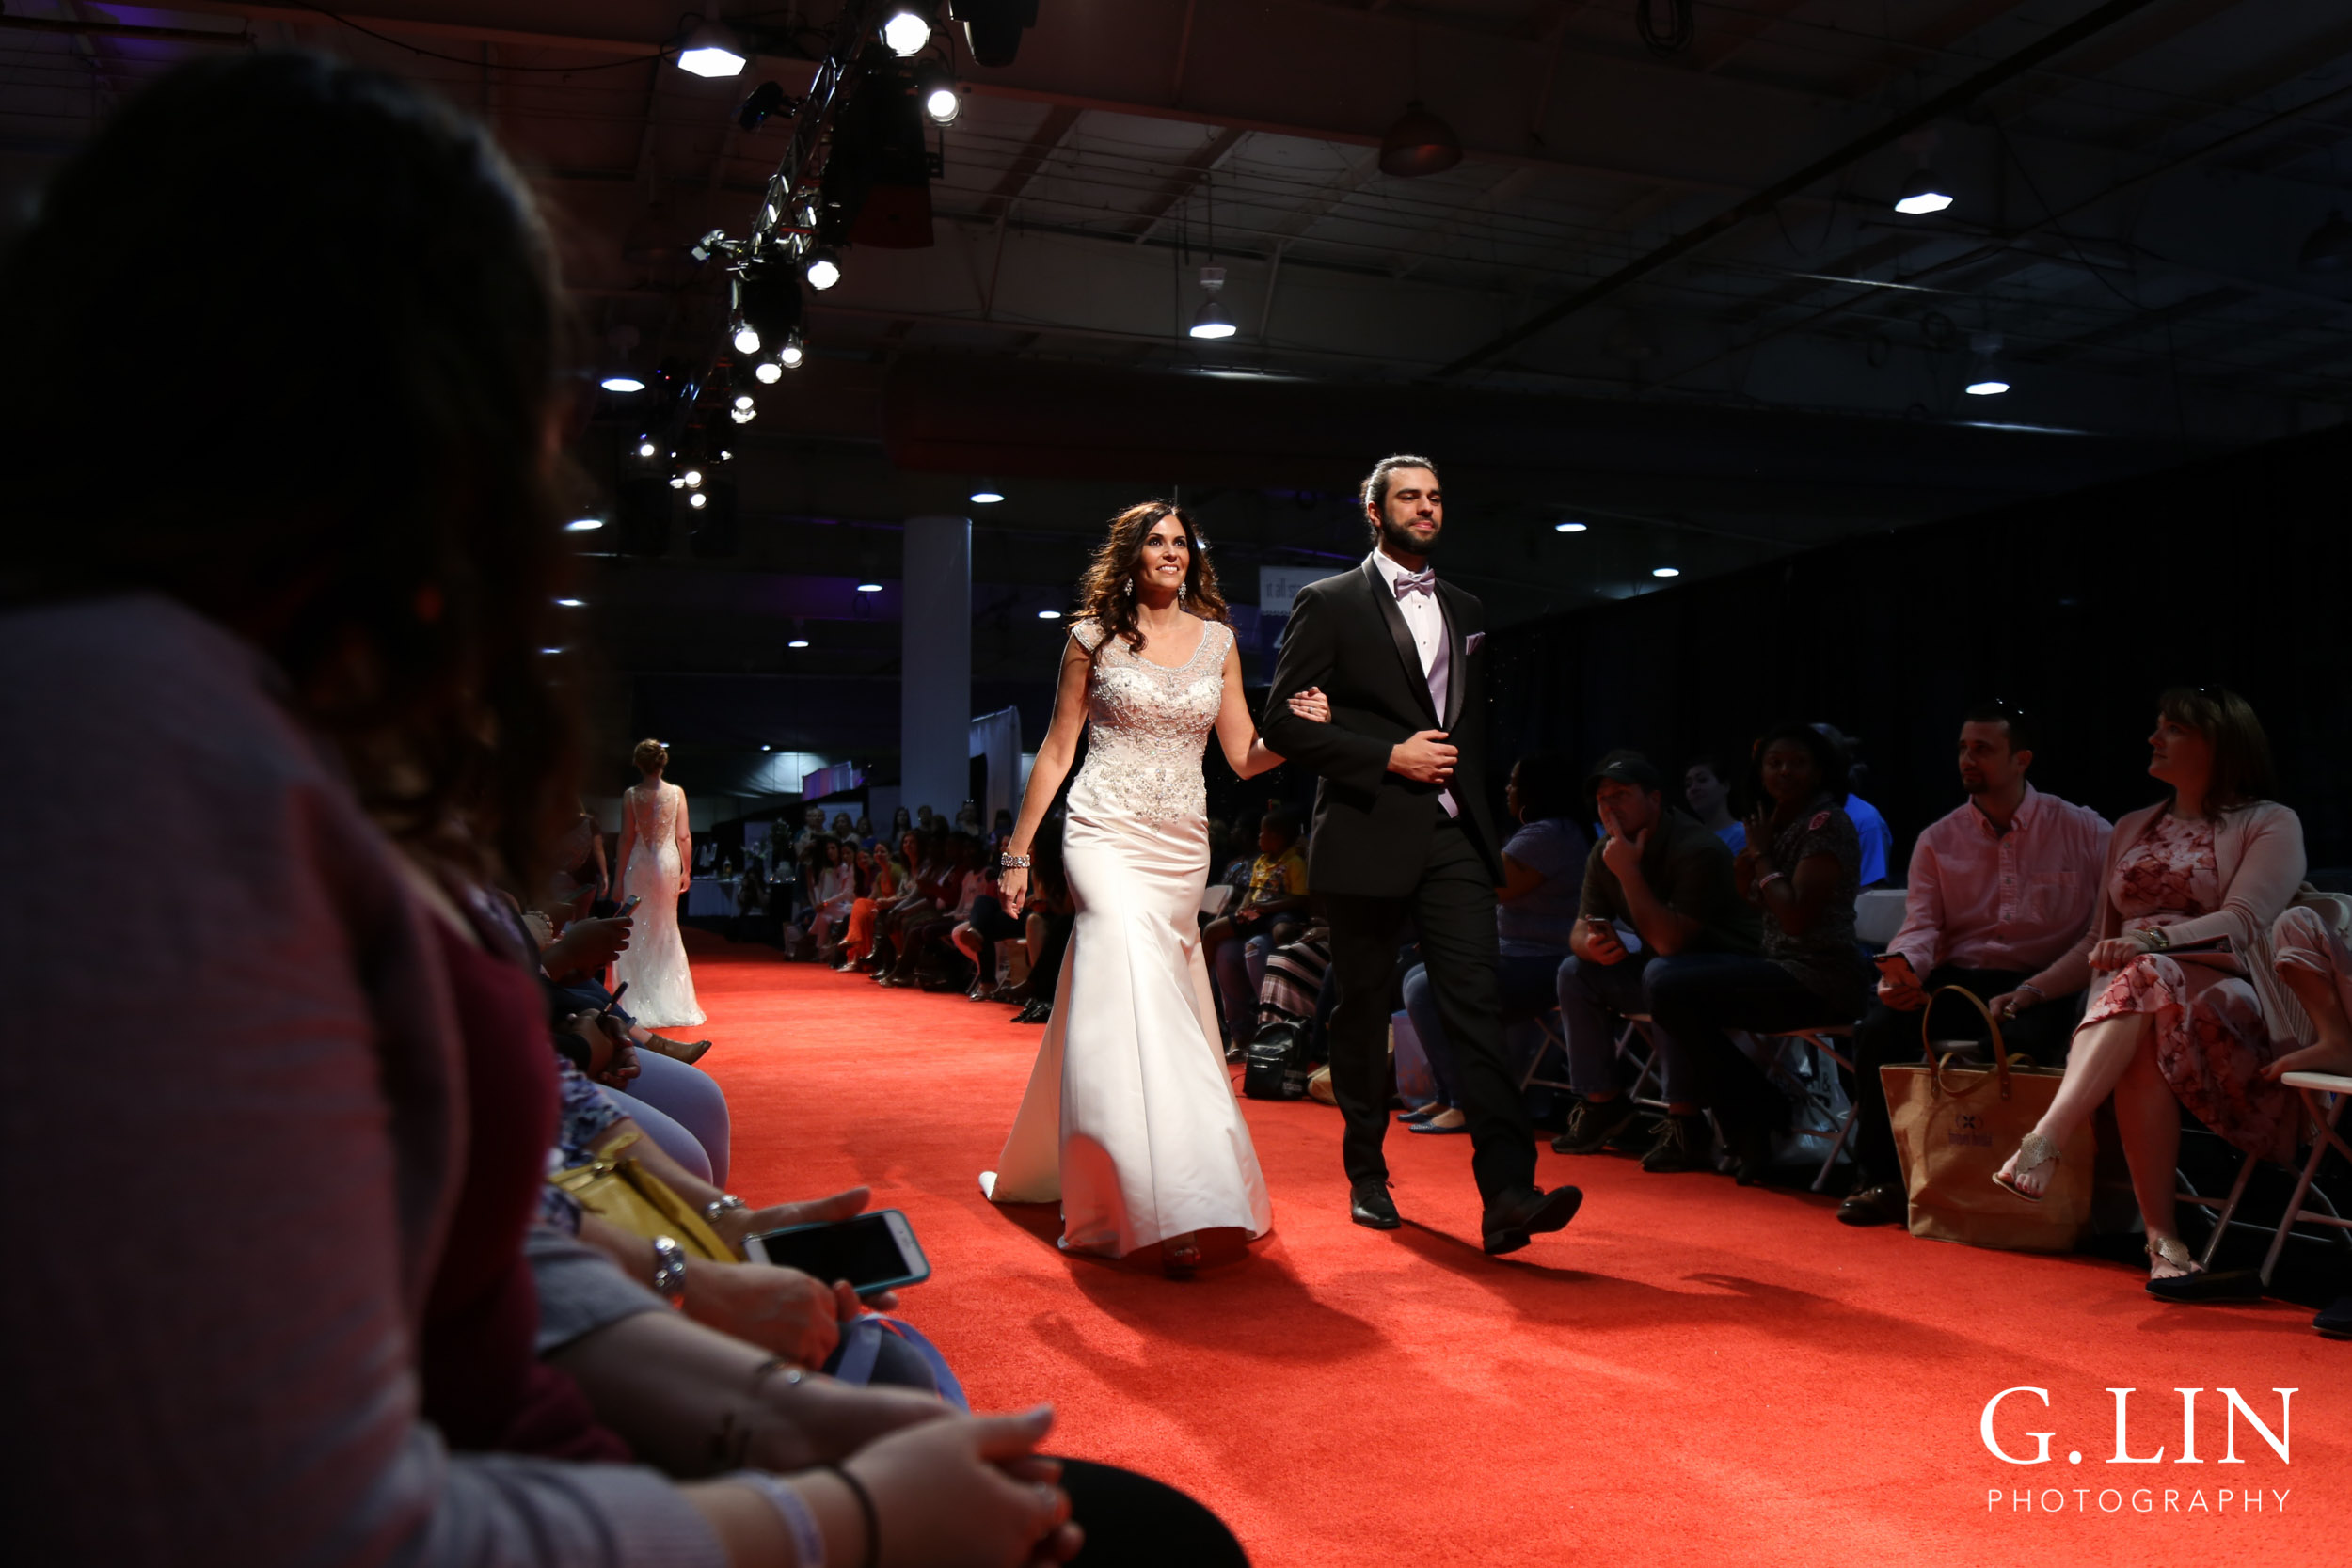 Raleigh Event Photographer | G. Lin Photography | Models walking down runway in wedding dress and tux